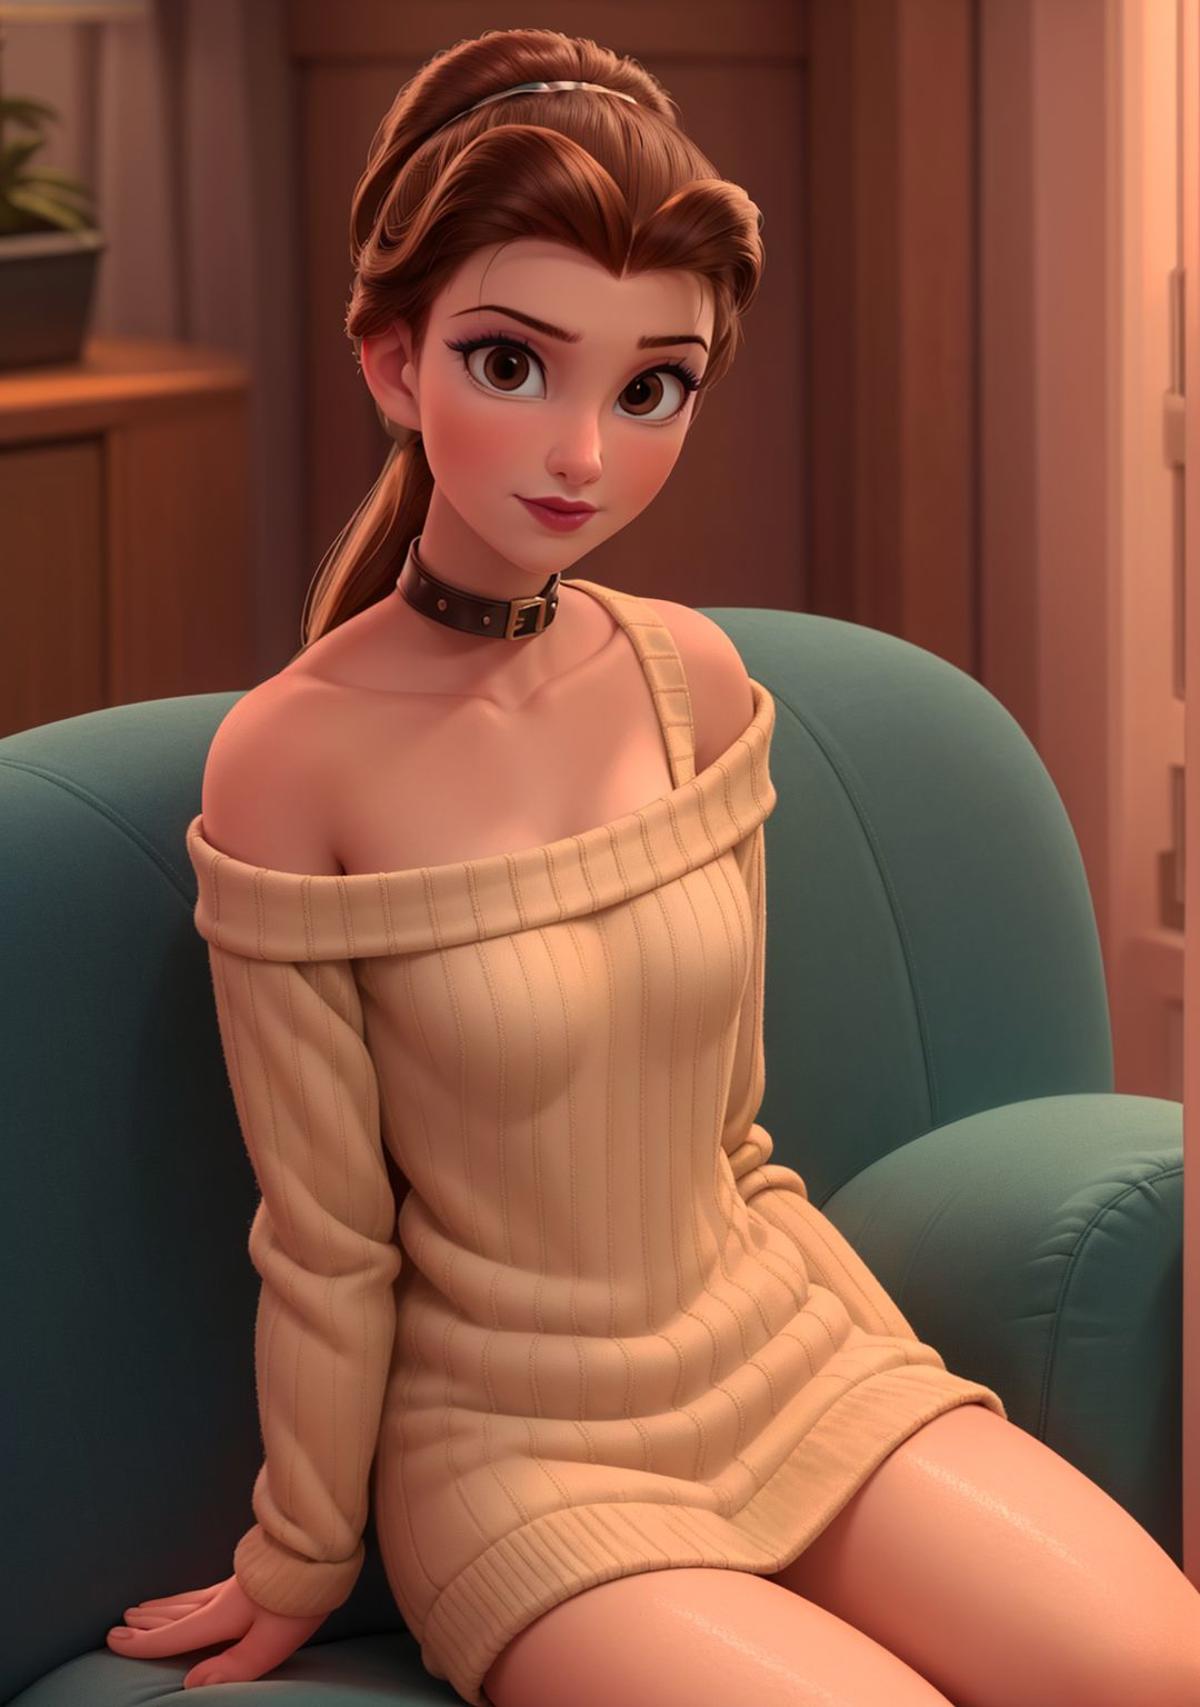 Belle (Ralph Breaks the Internet) image by marusame